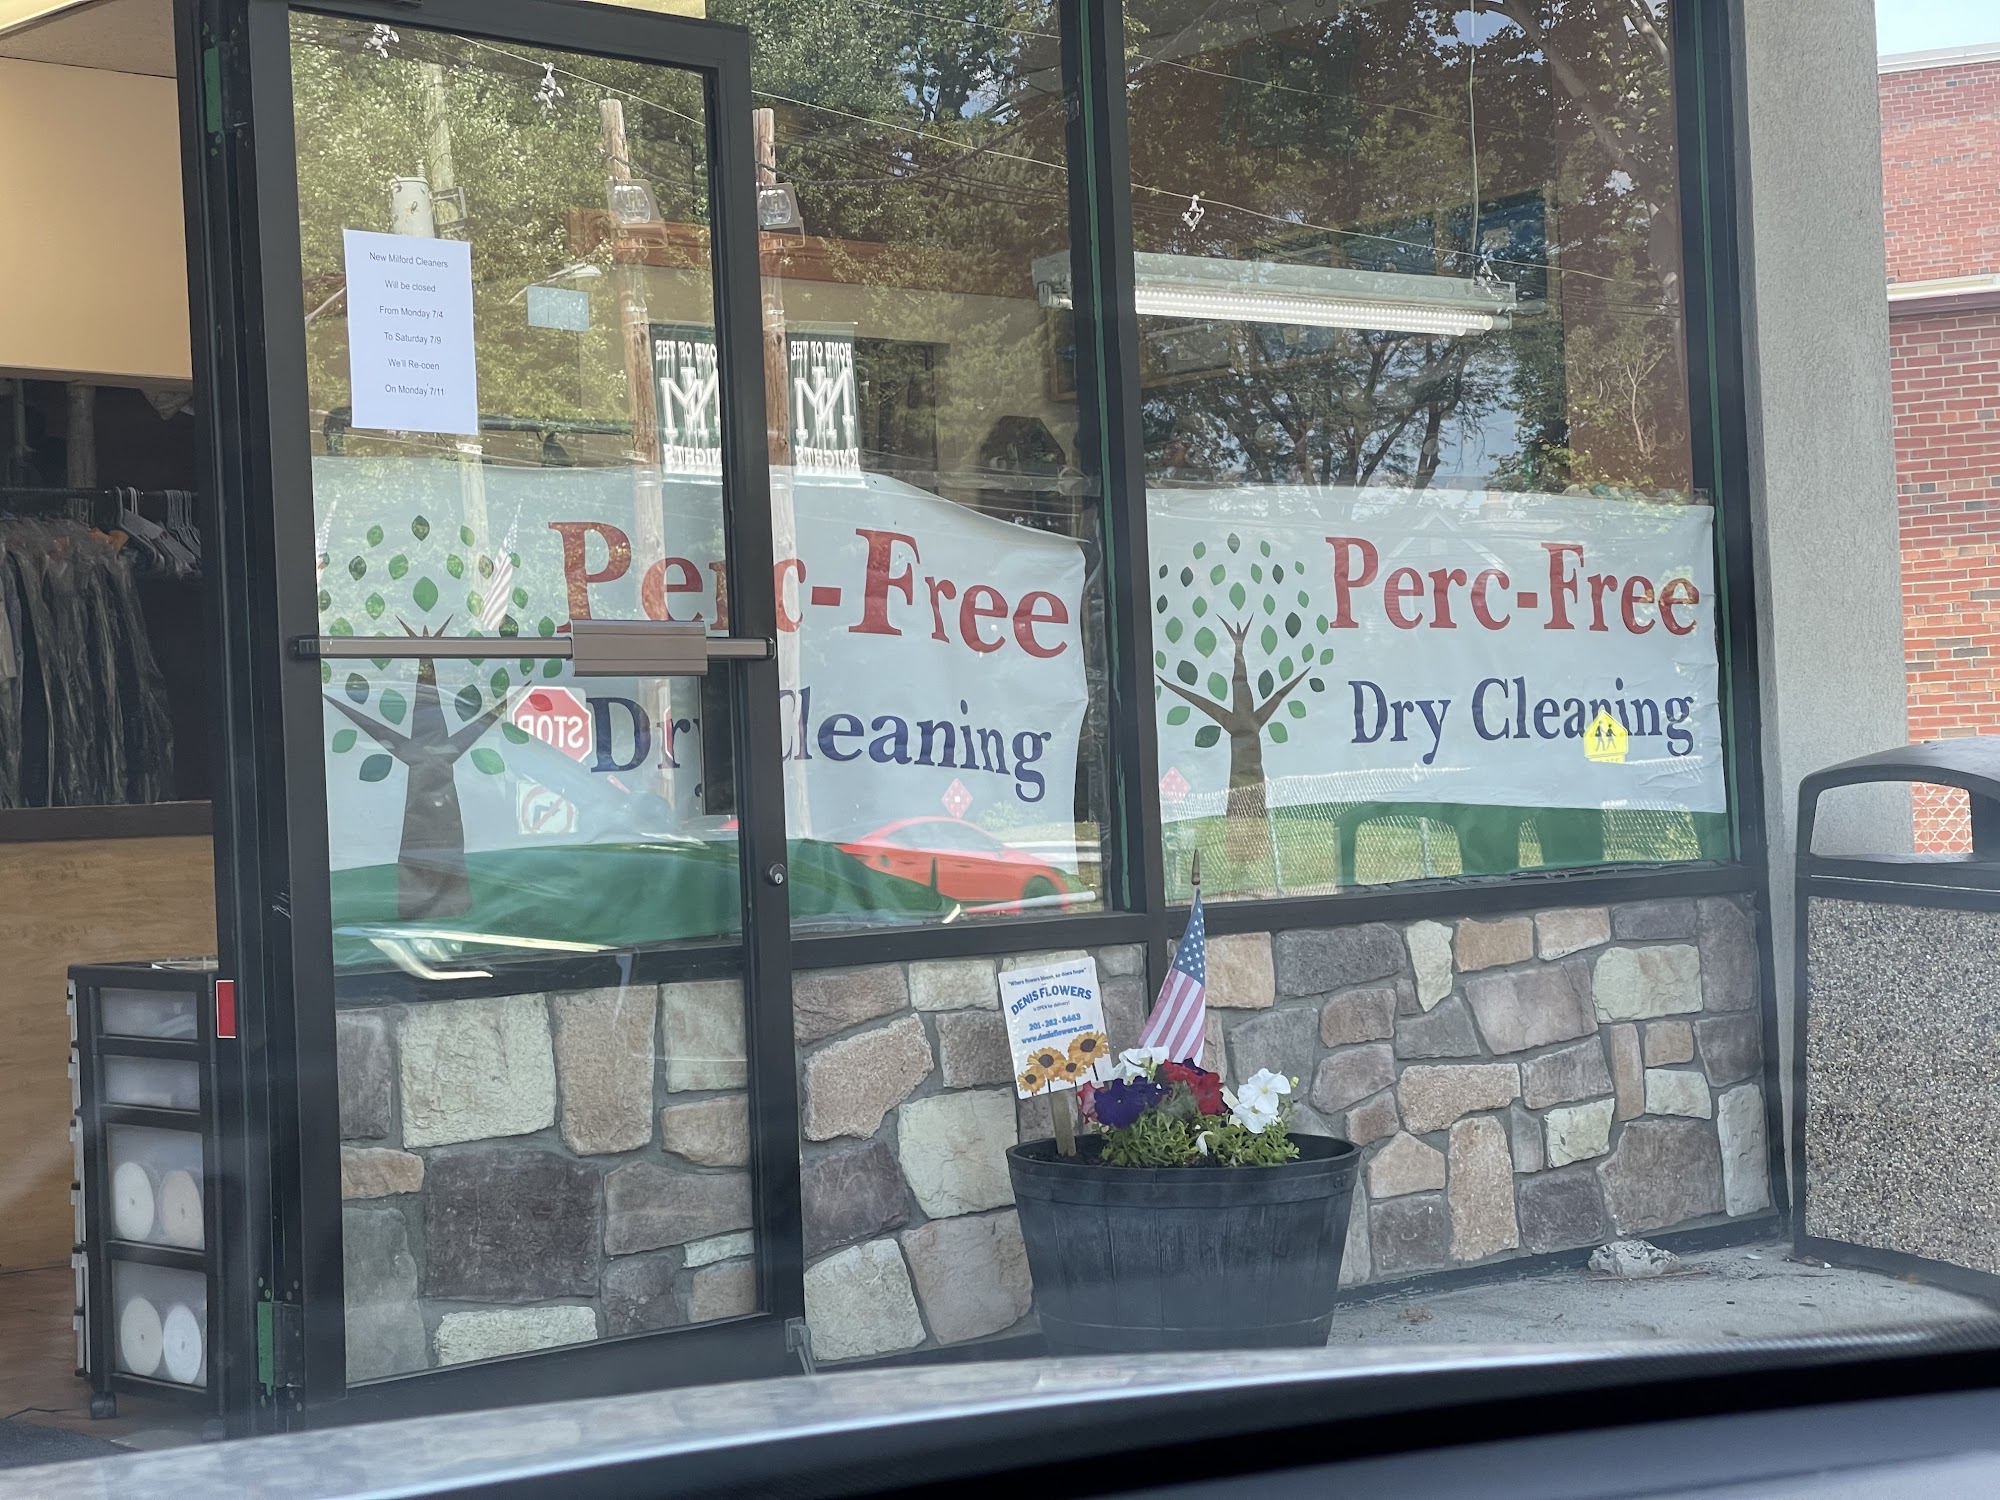 New Milford Dry Cleaning 356 River Rd, New Milford New Jersey 07646